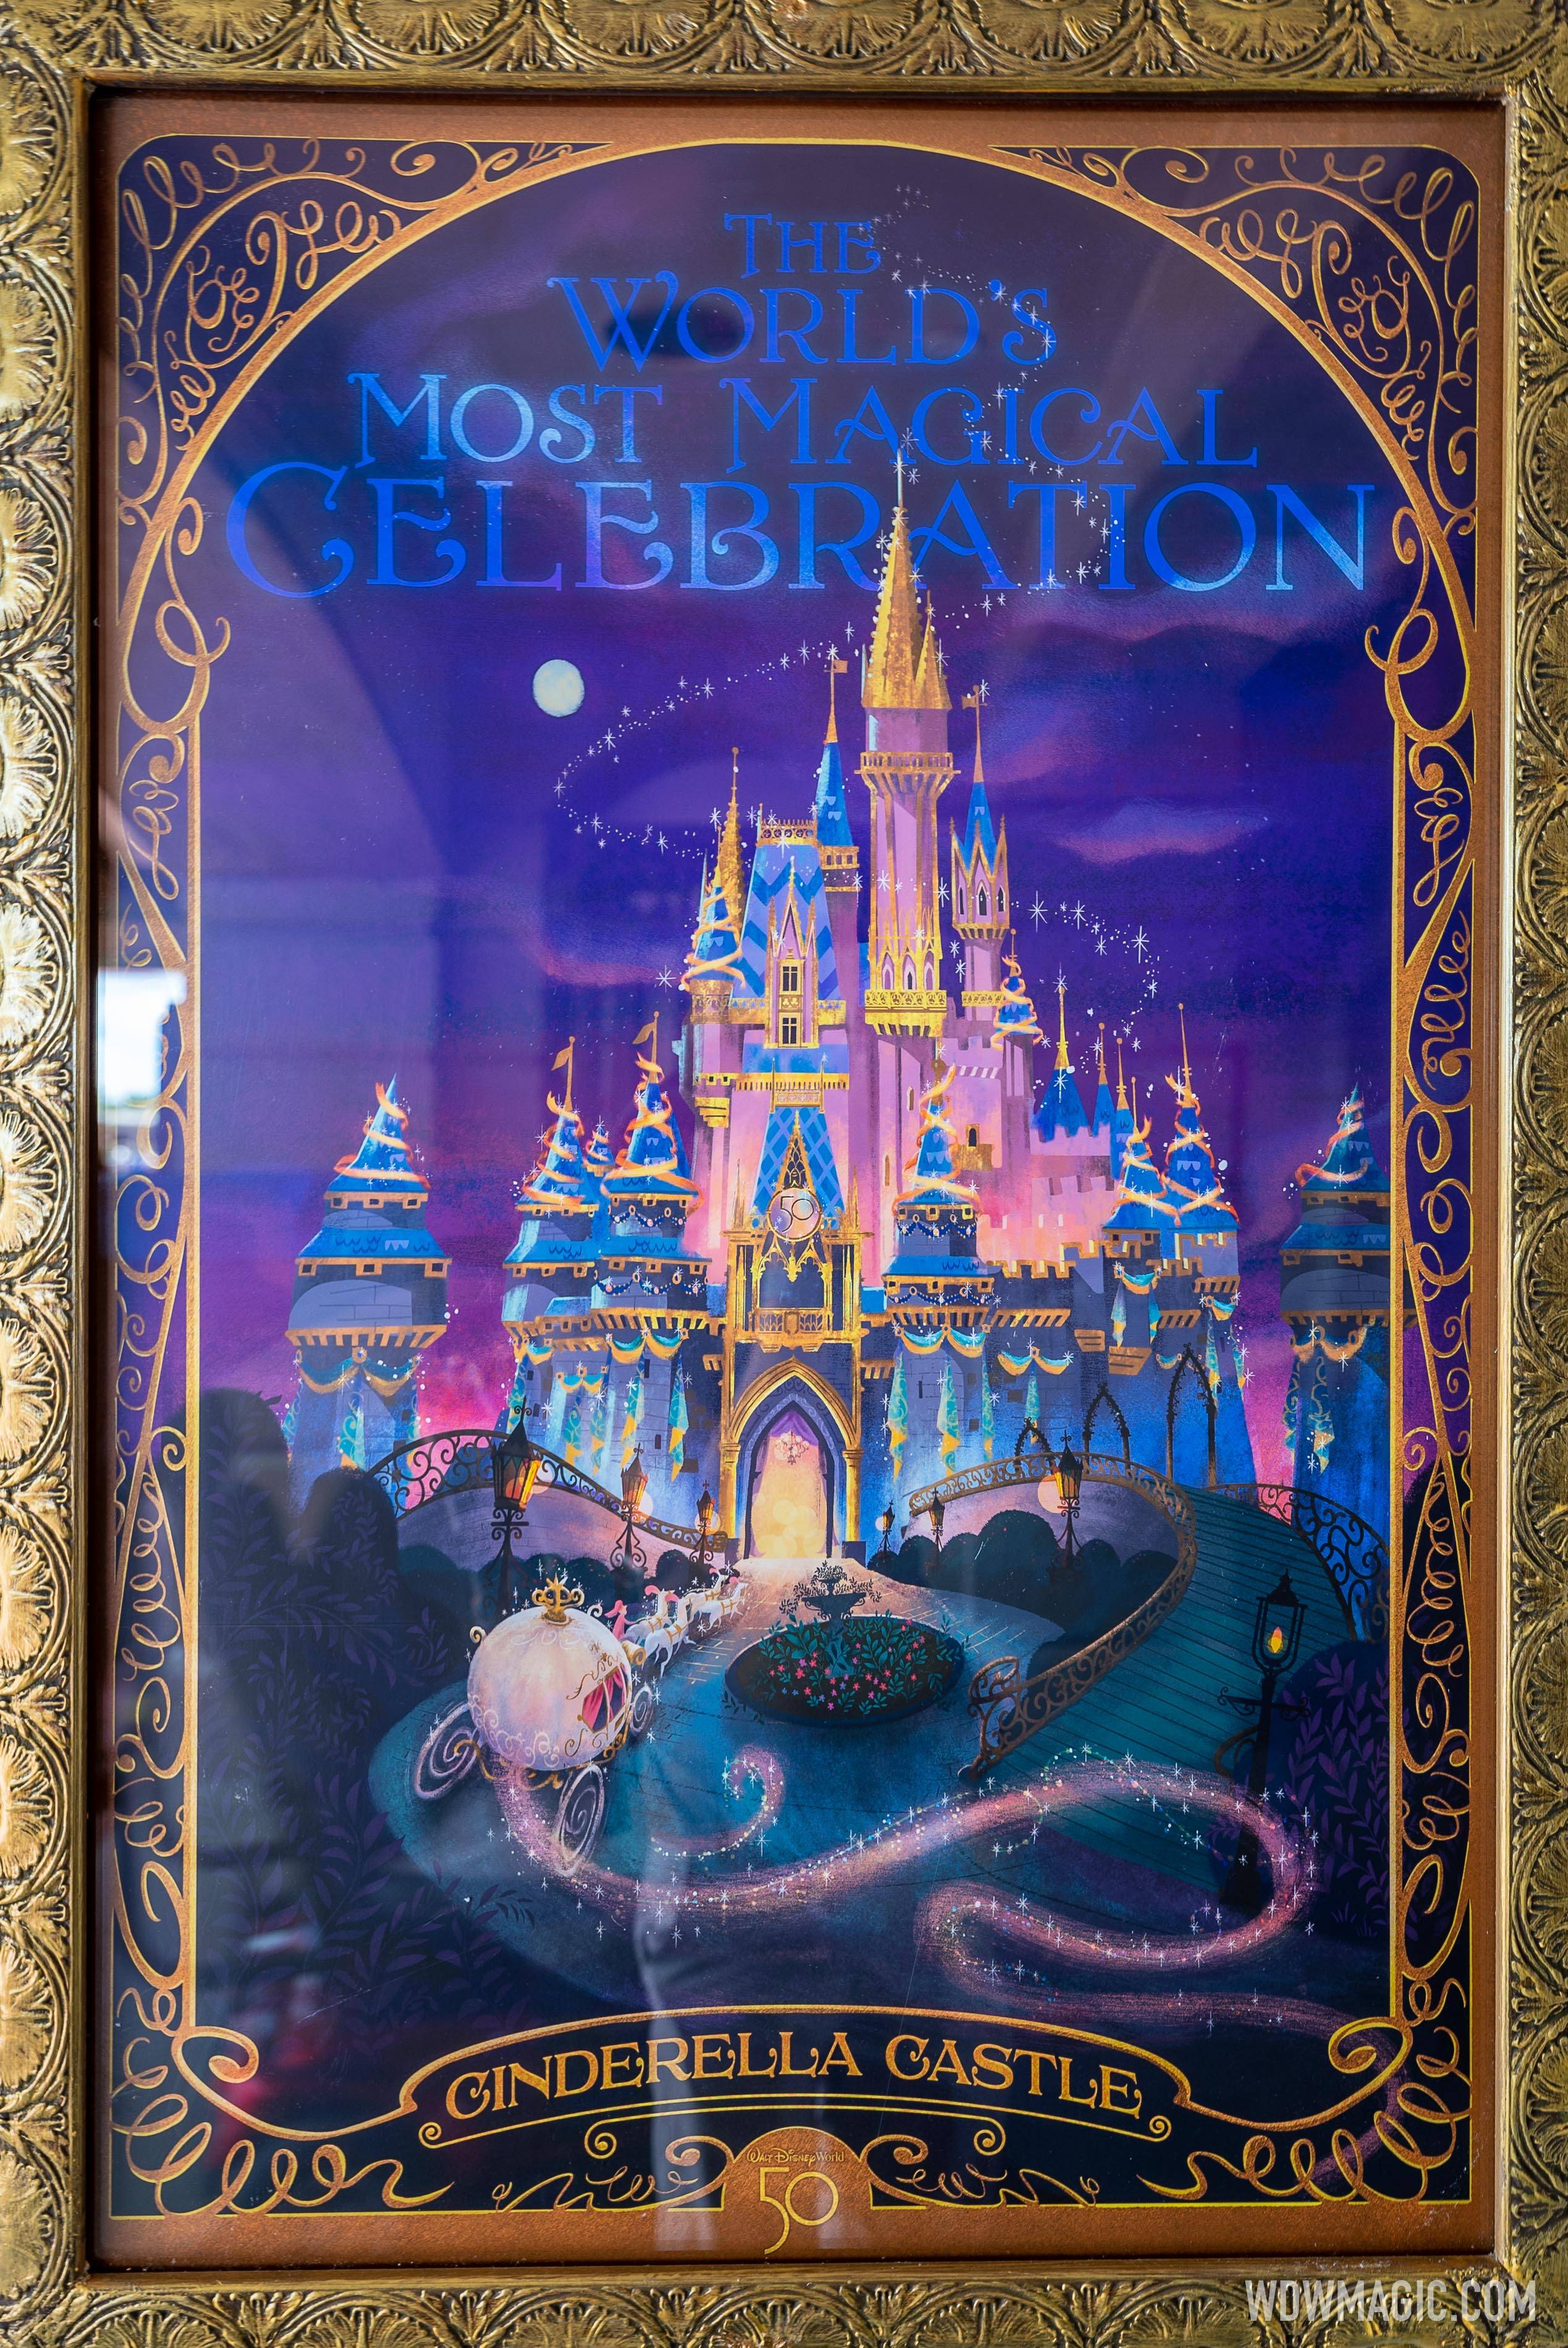 Vintage attraction posters at Magic Kingdom entrance - Photo 17 of 18